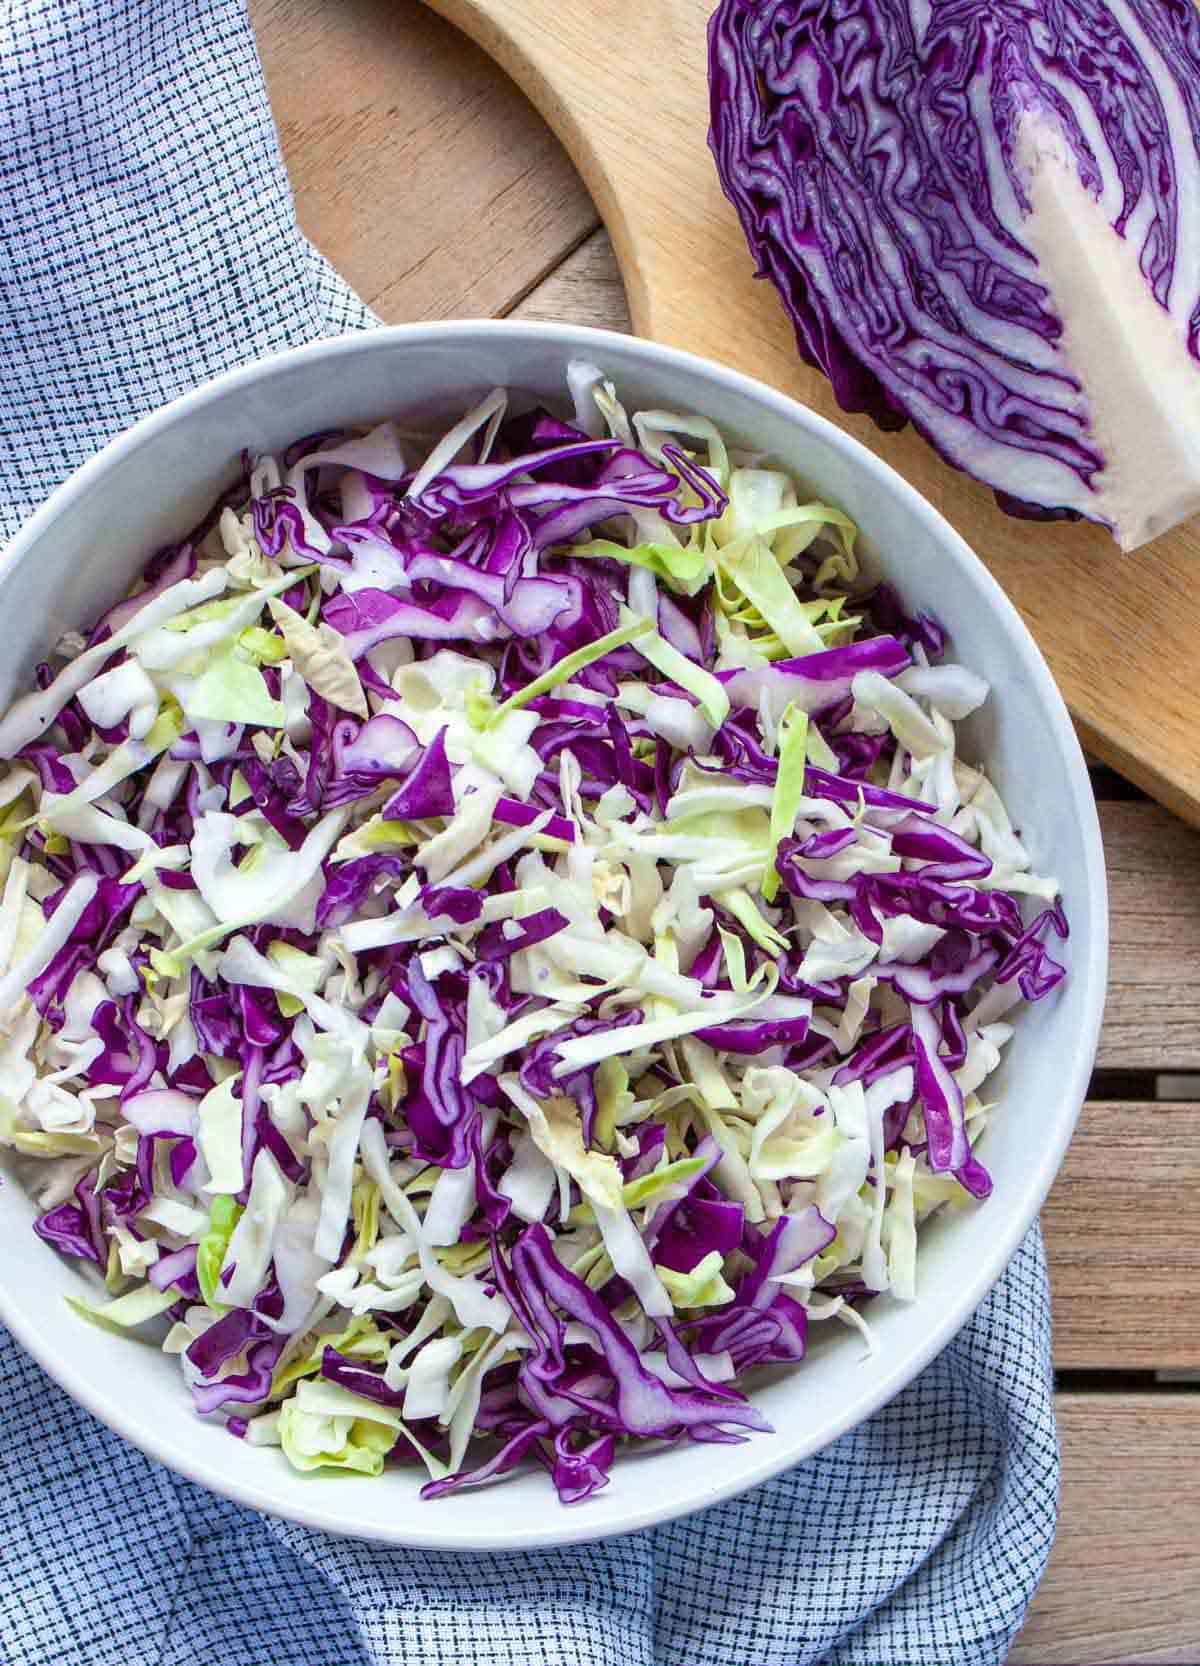 Shredded green and red cabbage in a white bowl on a checkered kitchen towel.